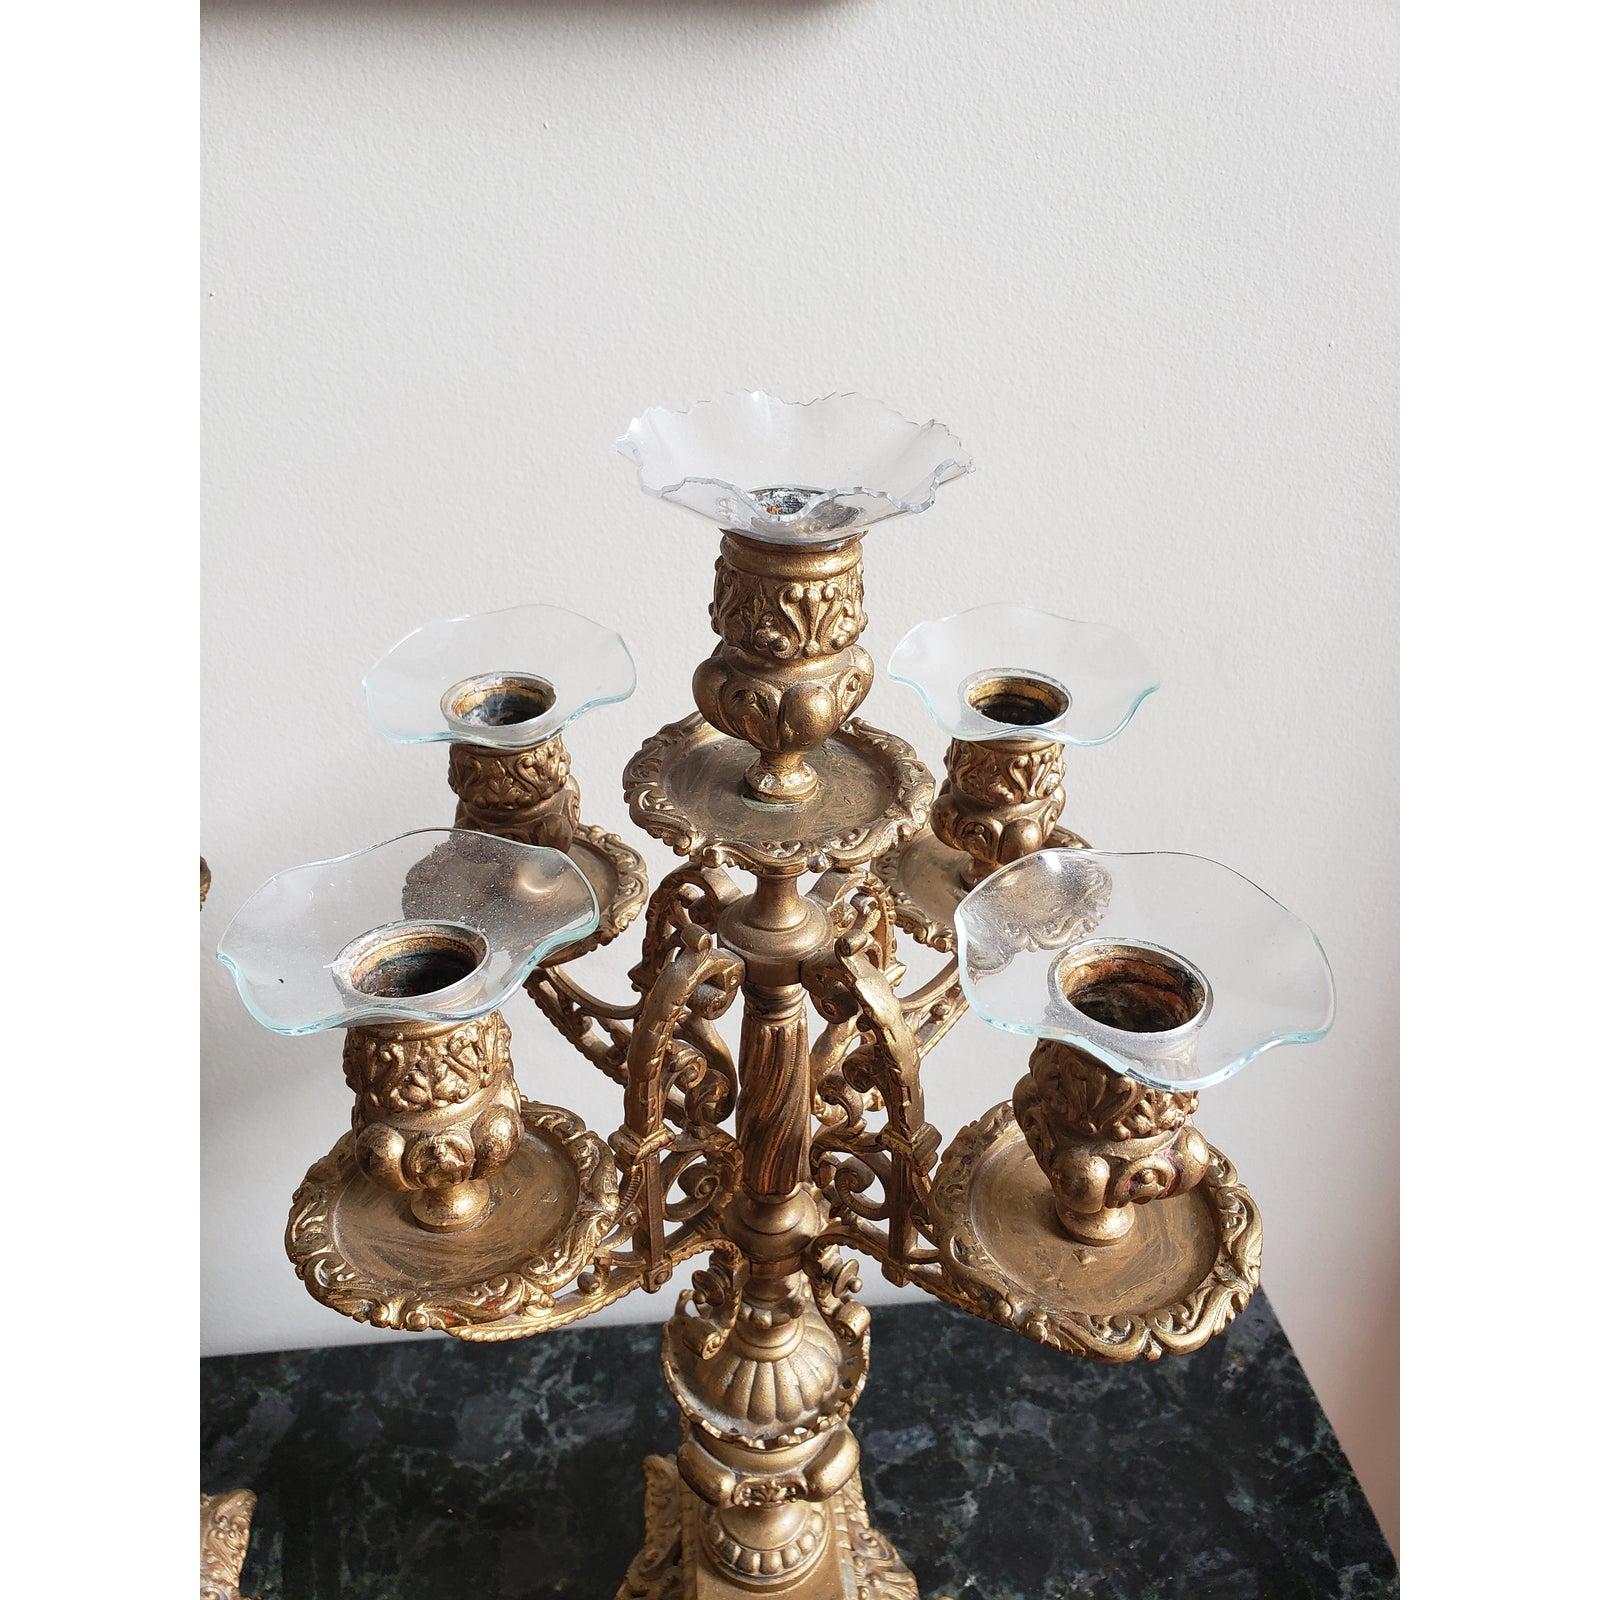 1930s Italian Rococo 5 Arm Gilted Bronze Candelabras, a Pair In Good Condition For Sale In Germantown, MD